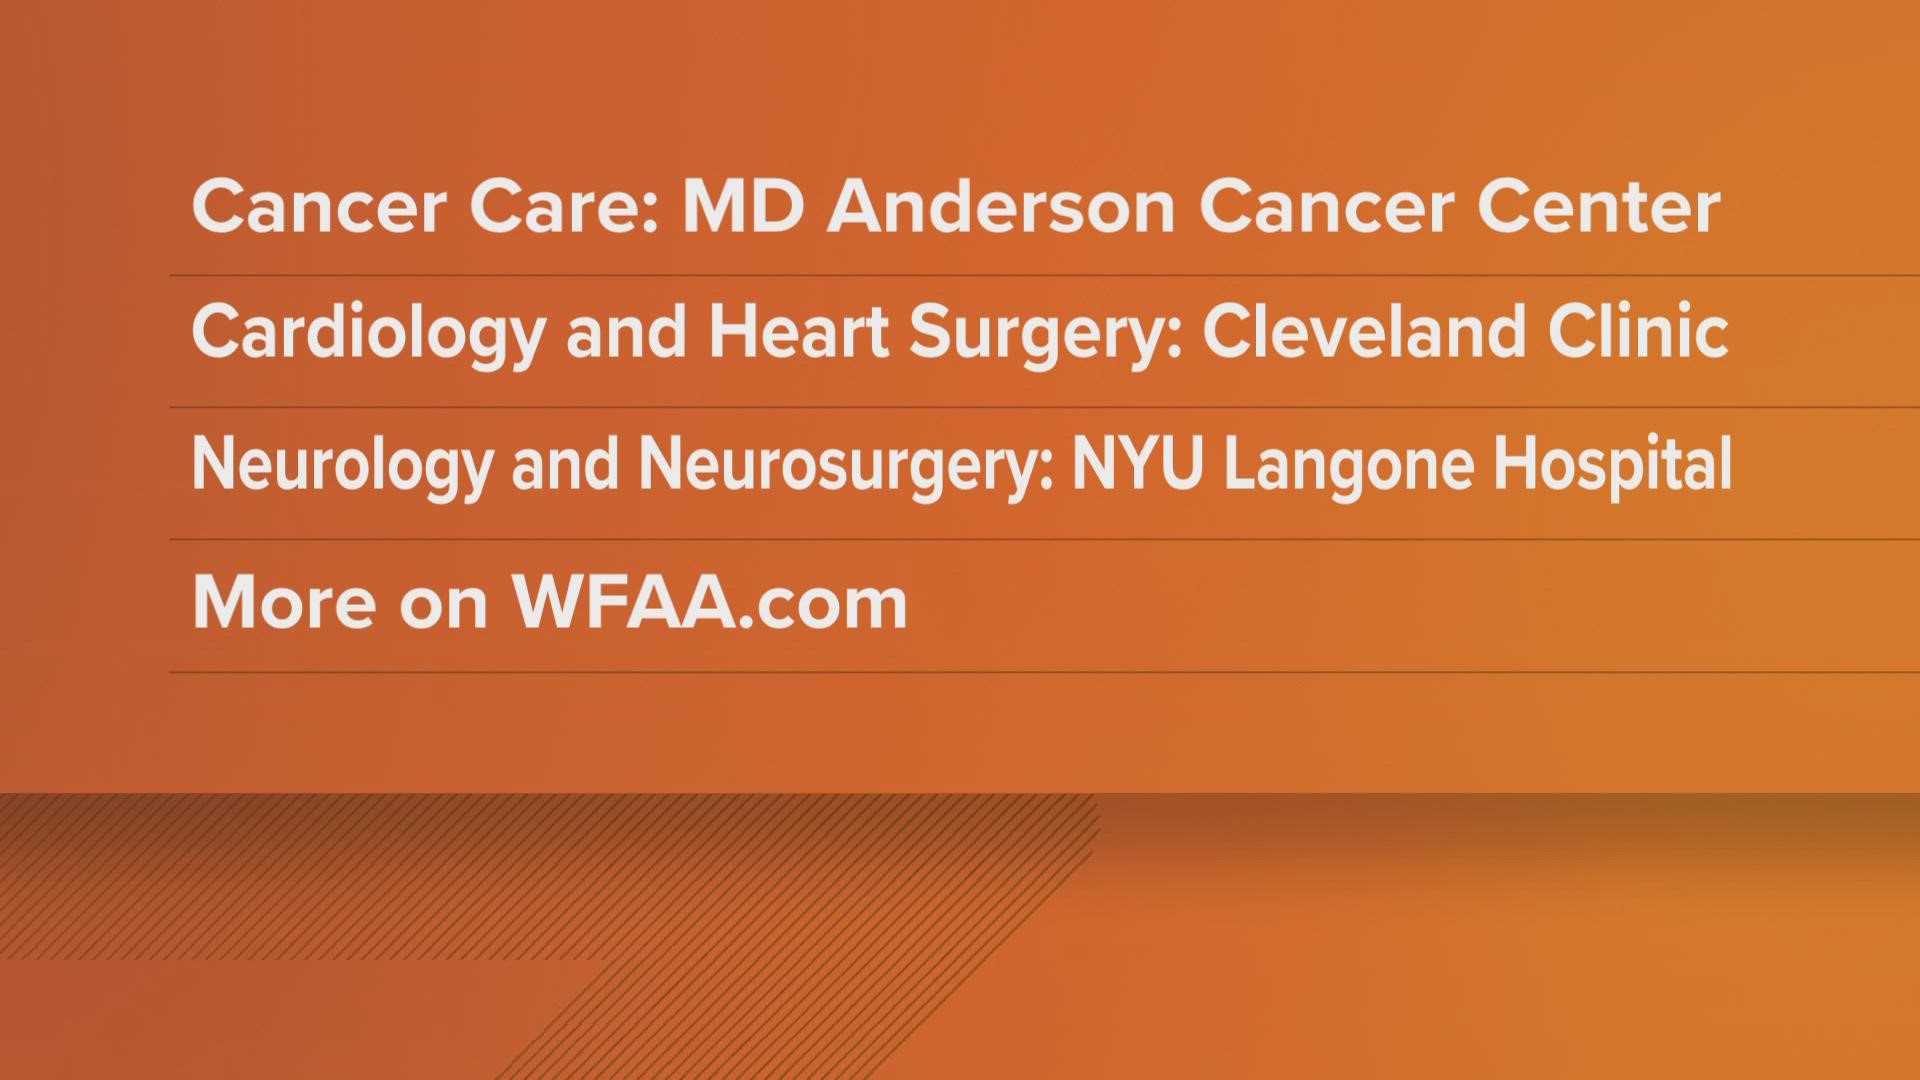 University of Texas-MD Anderson Cancer Center ranked first for cancer care.